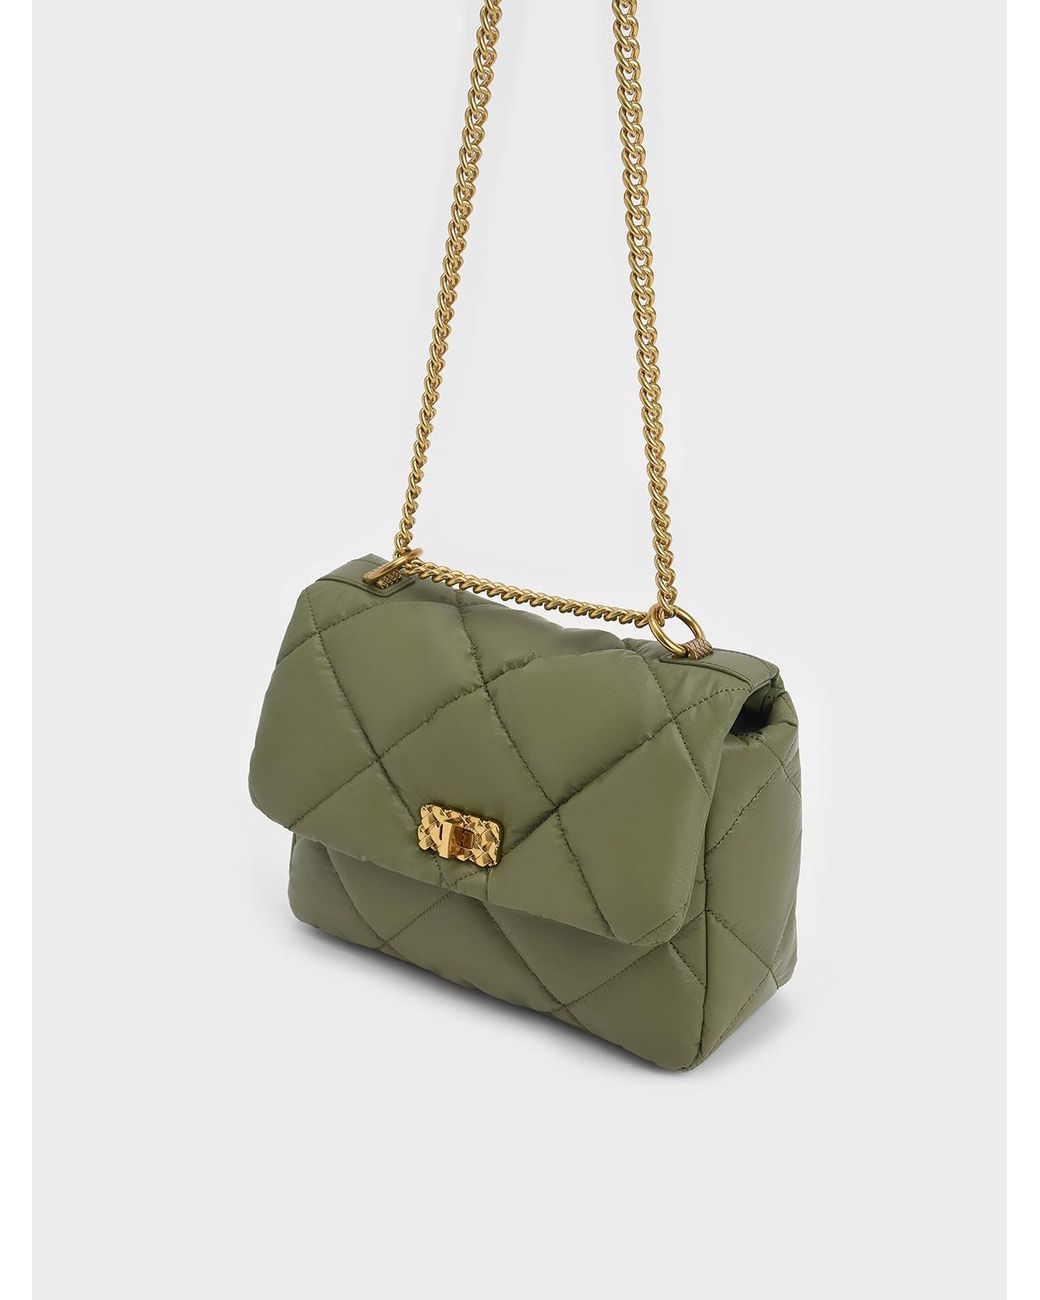 Charles & Keith Paffuto Large Padded Shoulder Bag in Olive (Green 